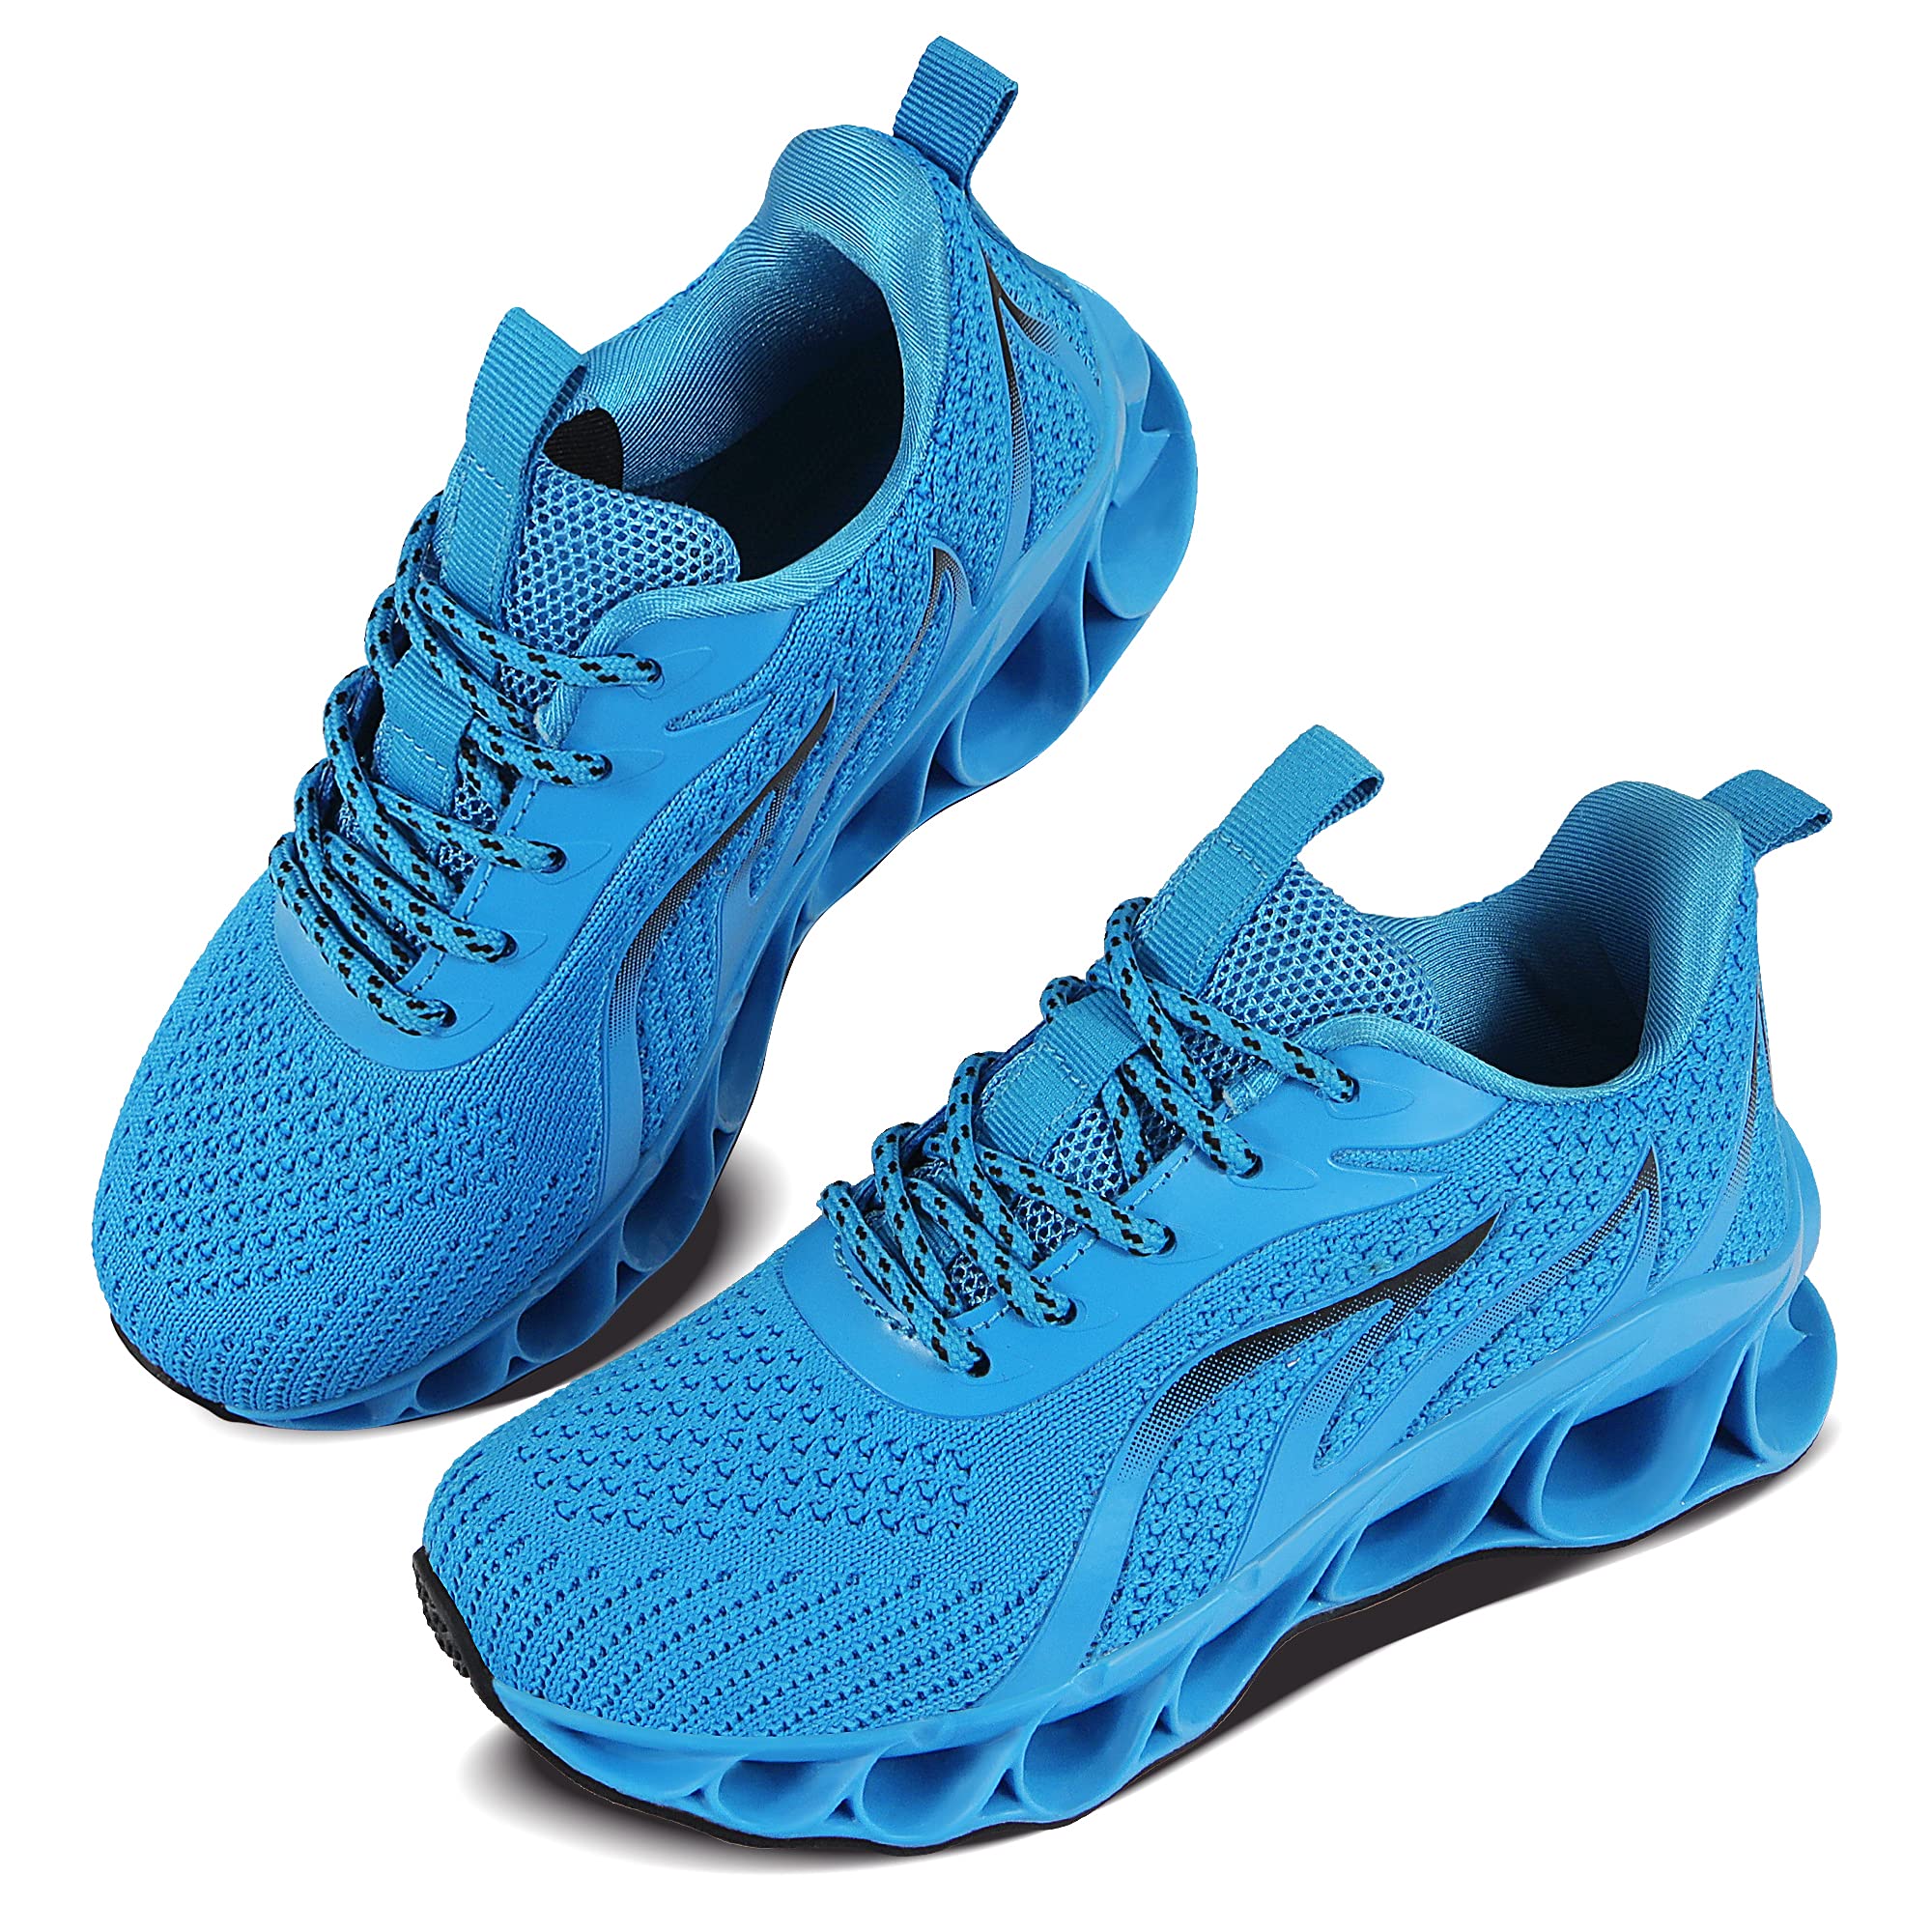 APRILSPRING Boys Girls Shoes Sneakers Running Breathable Tennis for Kids